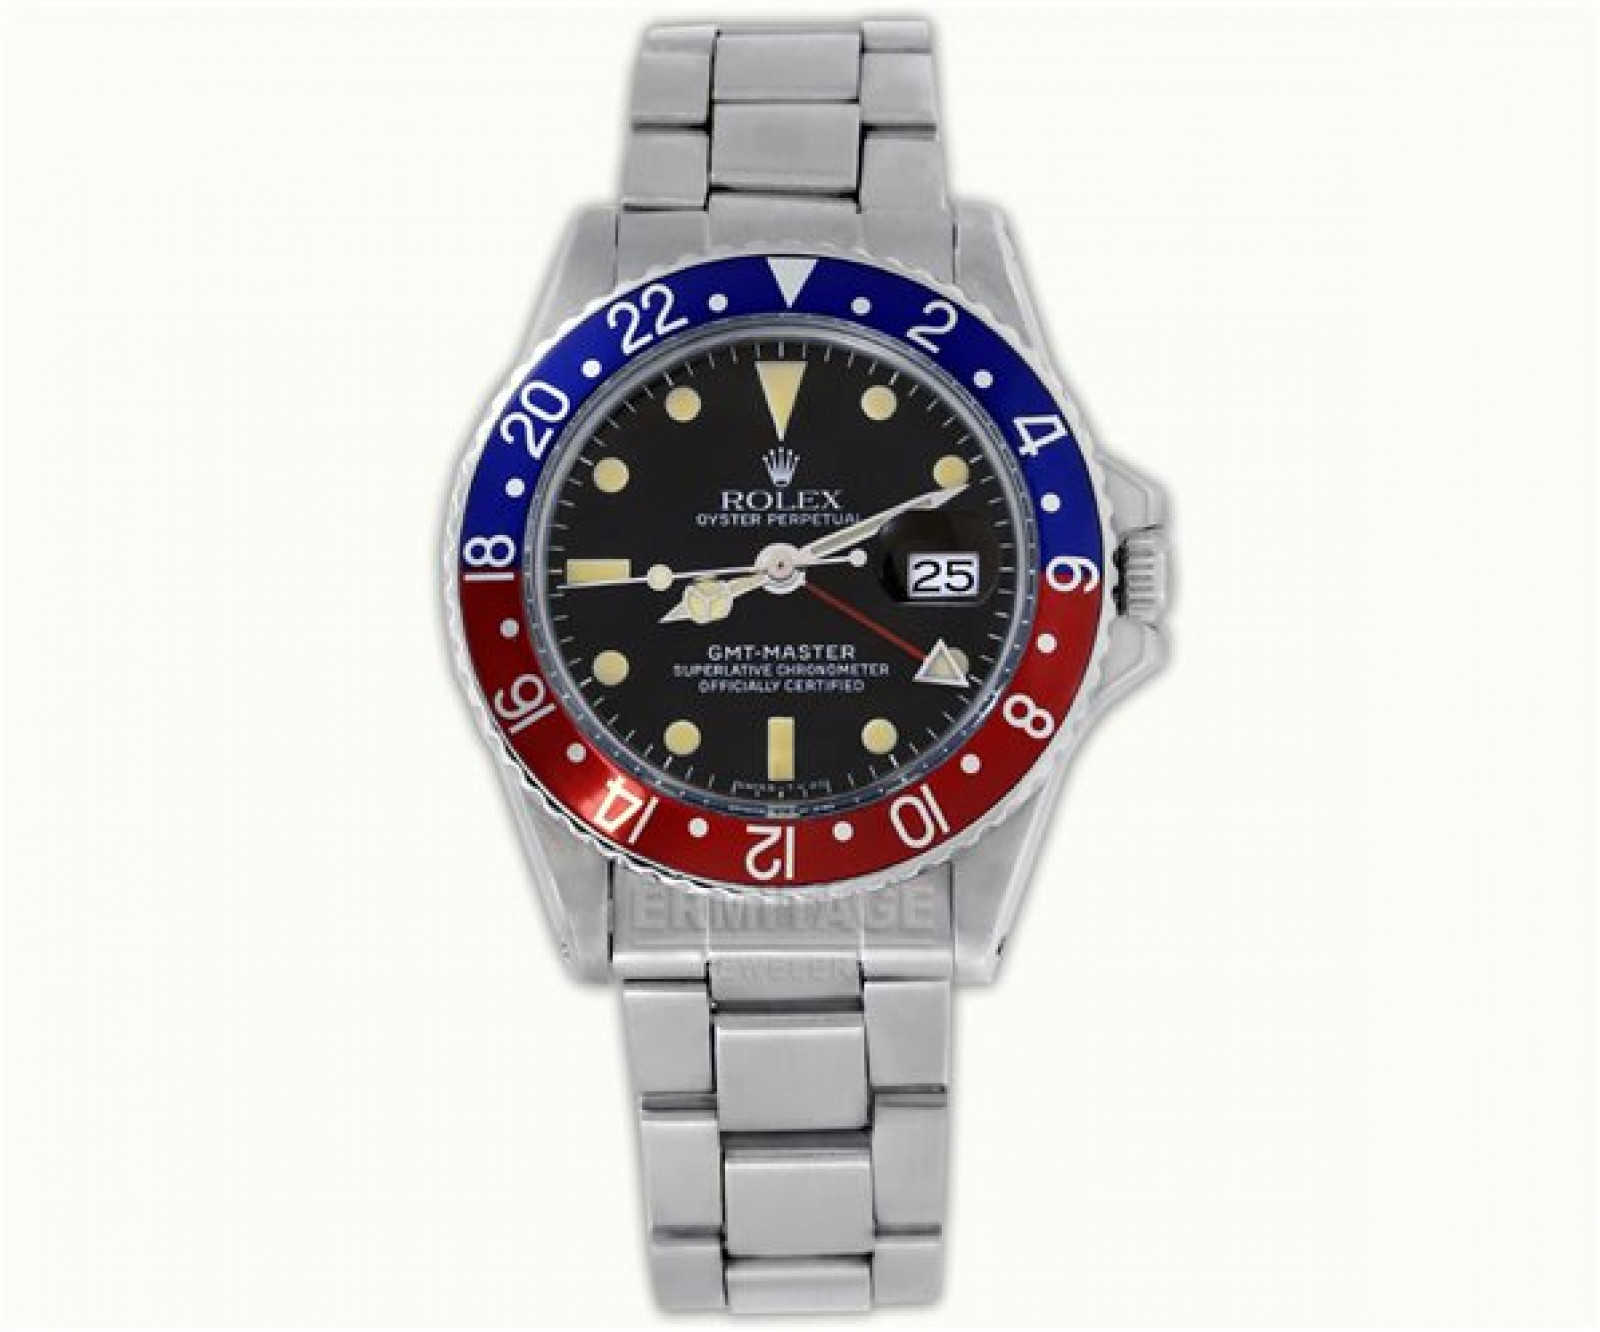 Vintage Rolex GMT-Master 1675 Steel Year 1968 with Black Dial 1968